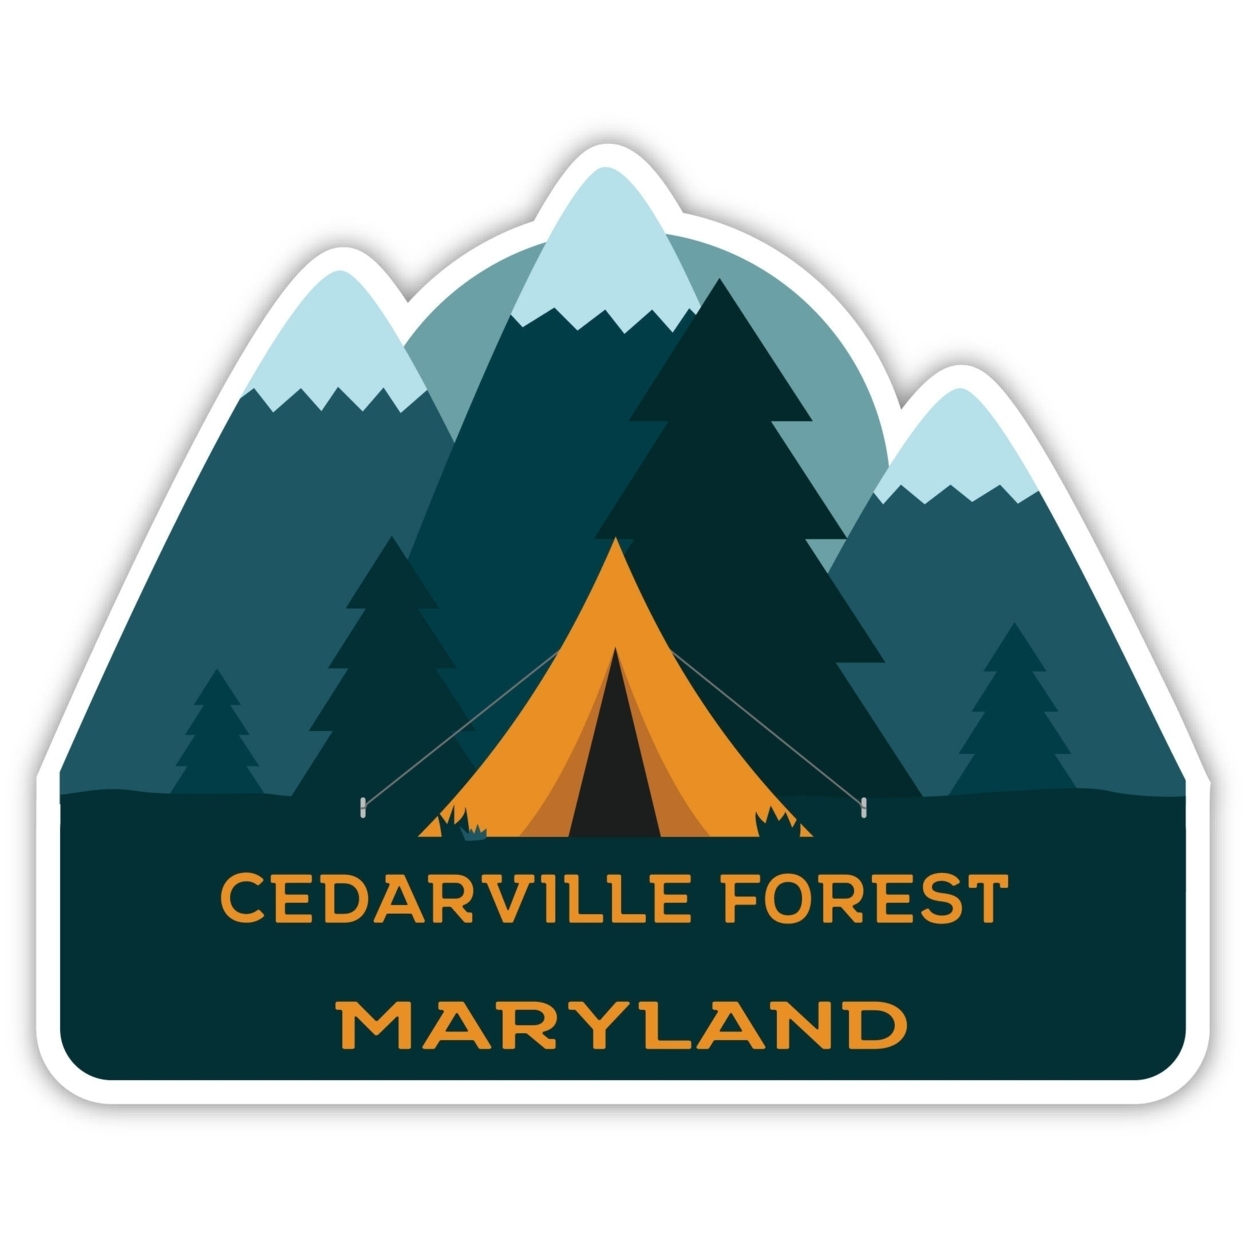 Cedarville Forest Maryland Souvenir Decorative Stickers (Choose Theme And Size) - Single Unit, 4-Inch, Tent